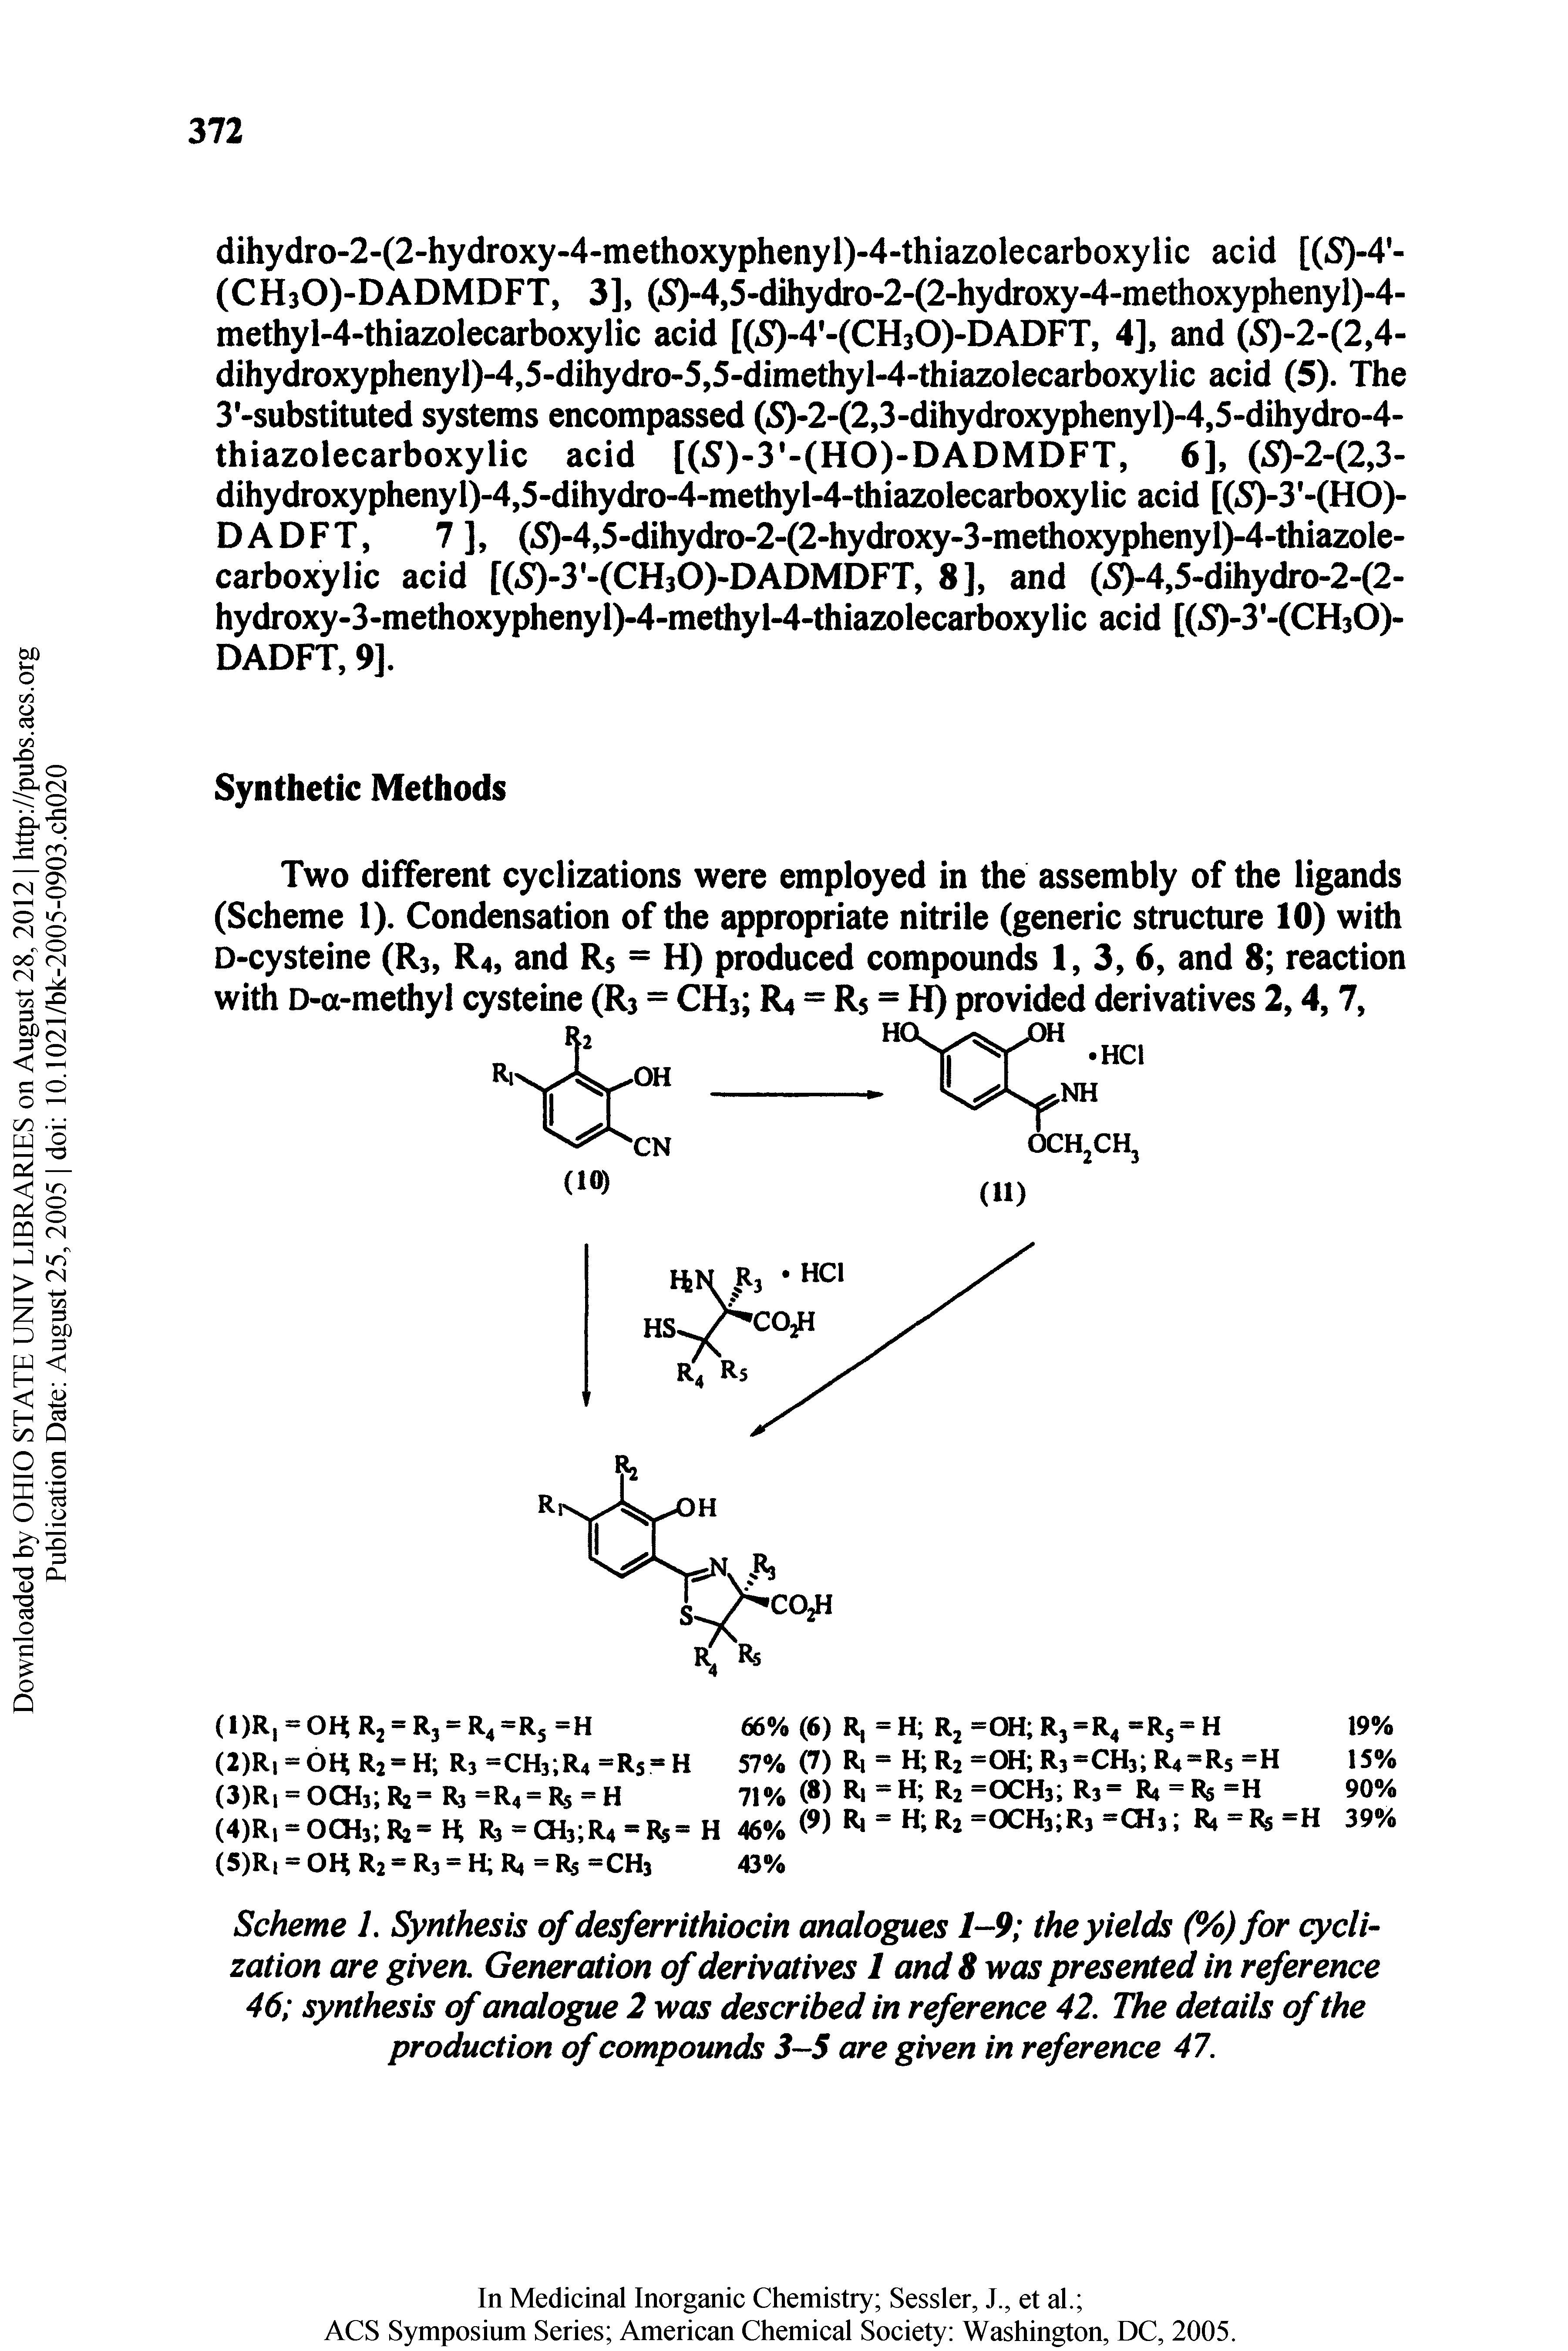 Scheme 1. Synthesis of desferrithiocin emalogues 1-9 the yields (%)for cycli-zation are given. Generation of derivatives 1 and 8 was presented in reference 46 synthesis of analogue 2 was described in reference 42. The details of the production of compounds 3—5 are given in reference 47.